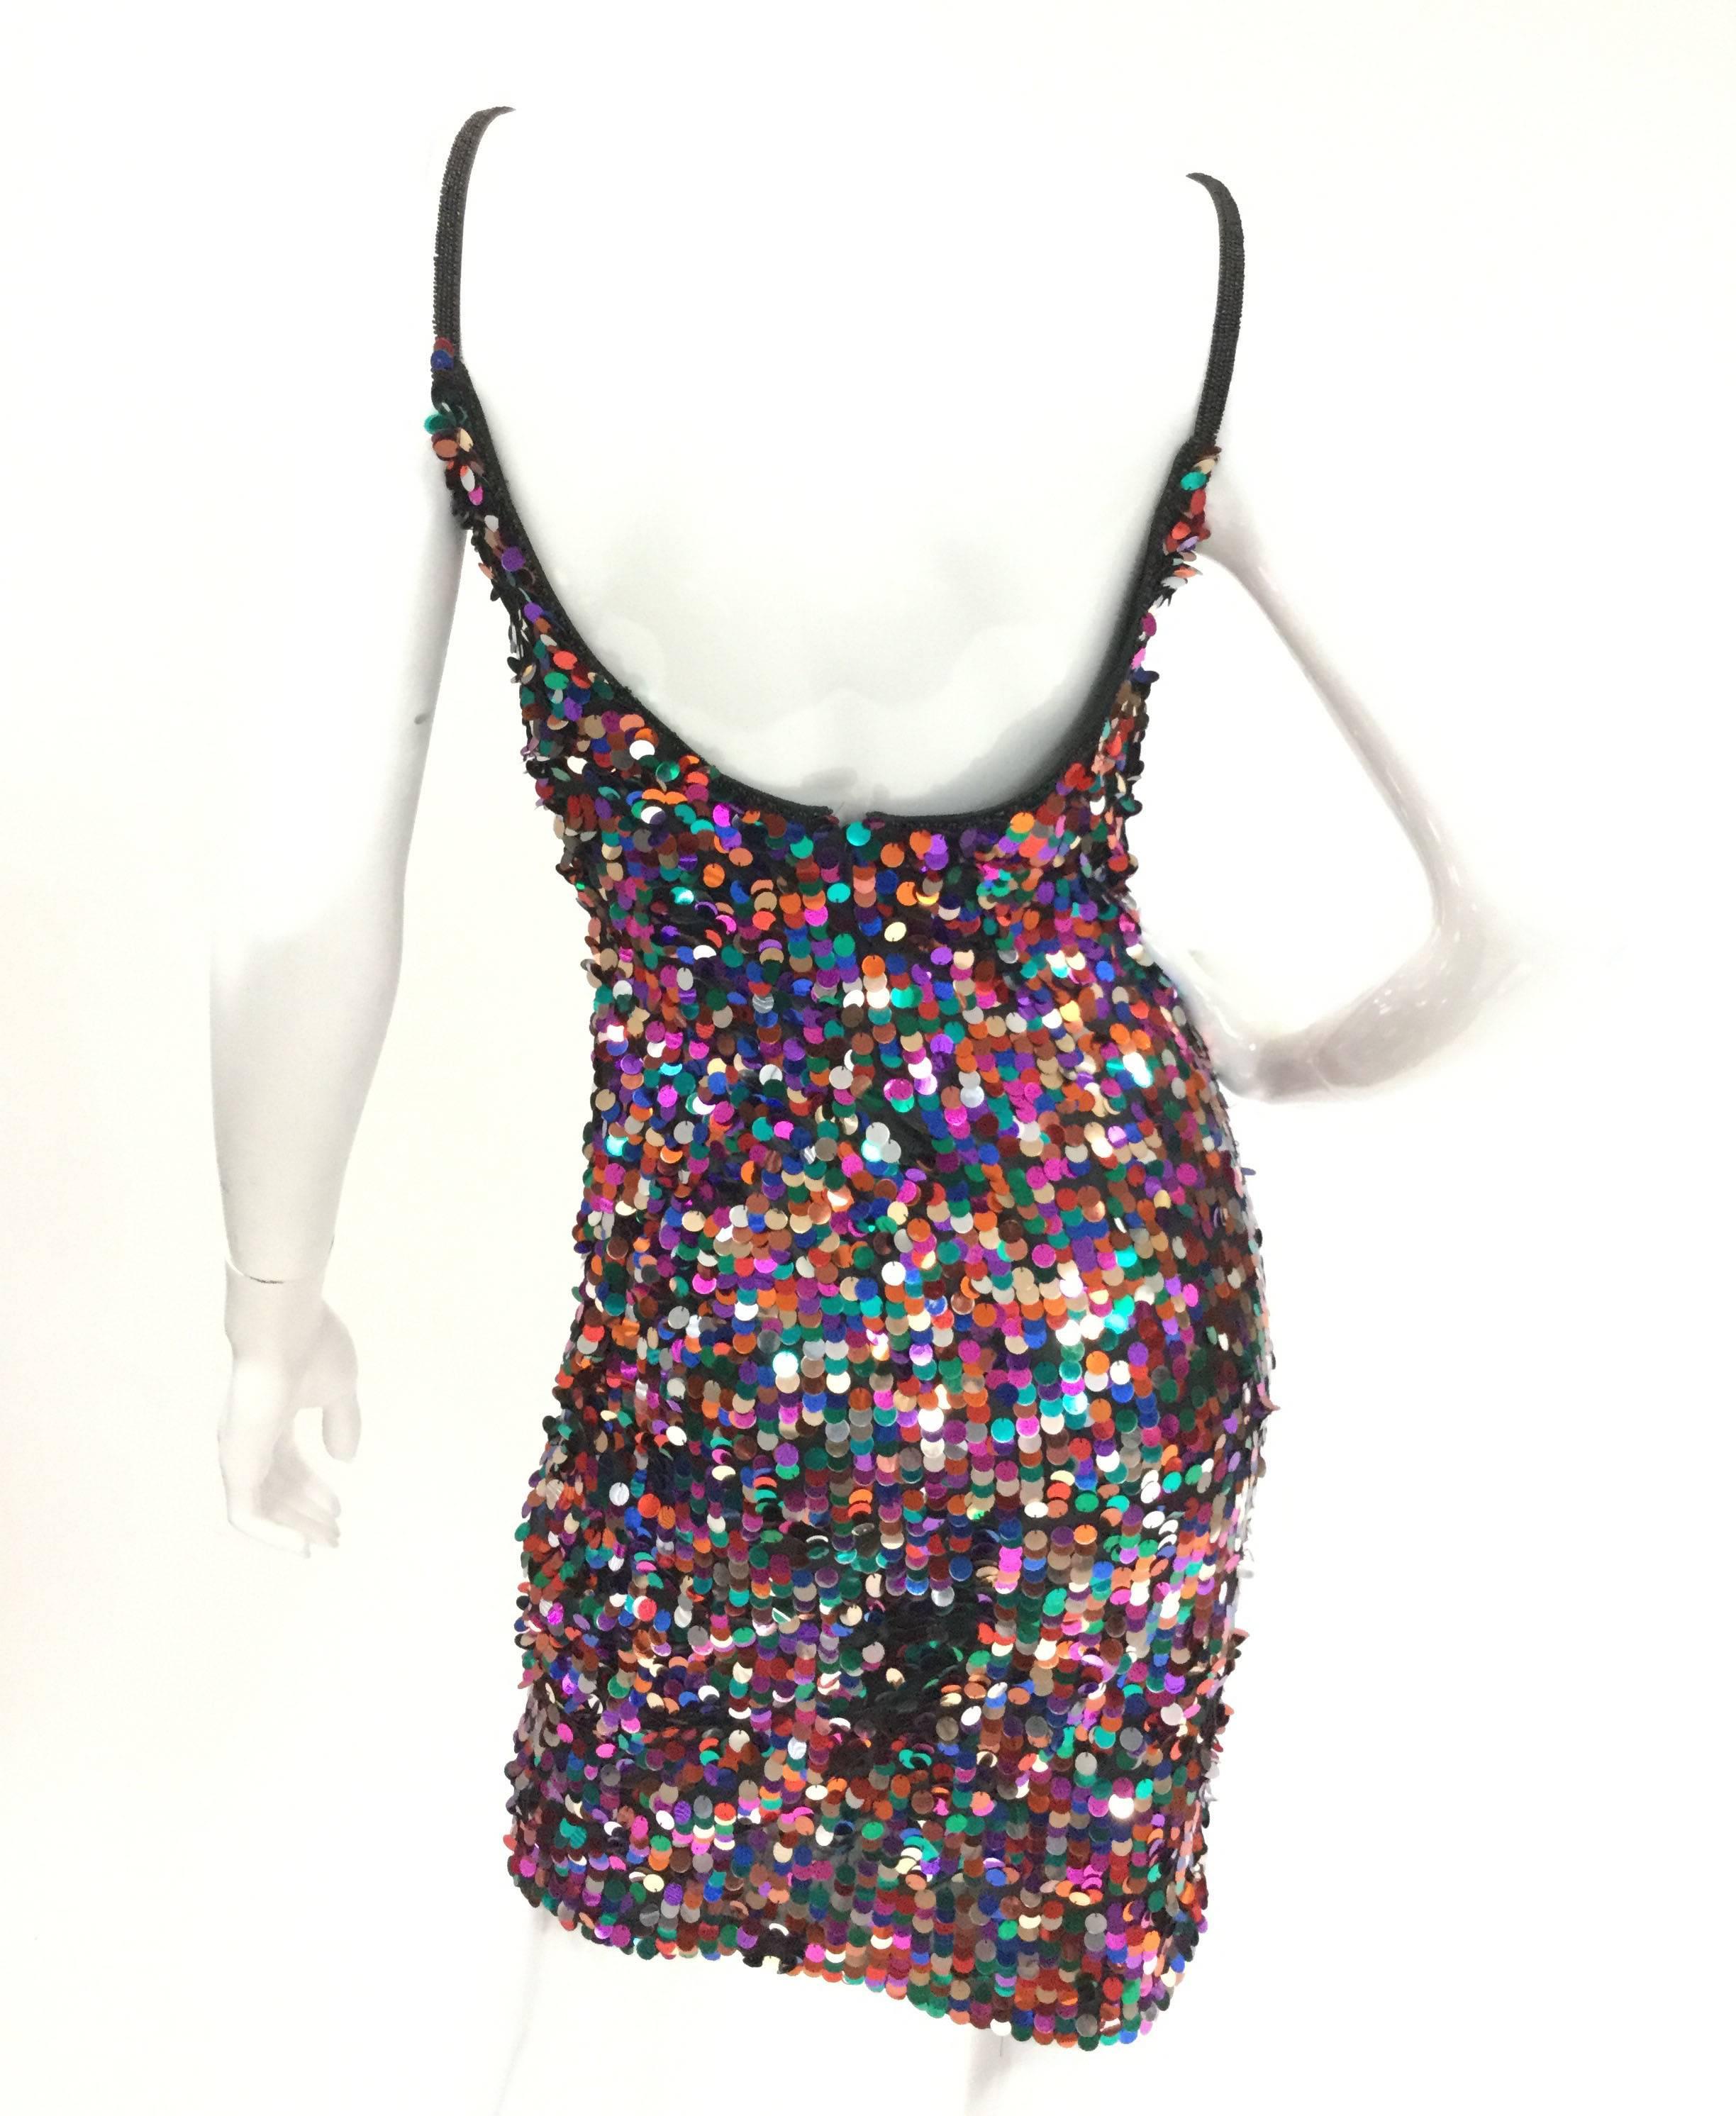 
Dance the night away in this gorgeous mini dress by Fred Hayman! The dress is heavily sequined in large multicolored paillette sequins. The sequins are attached at the top, allowing them to sway and flicker as you dance! This luminous dress has a